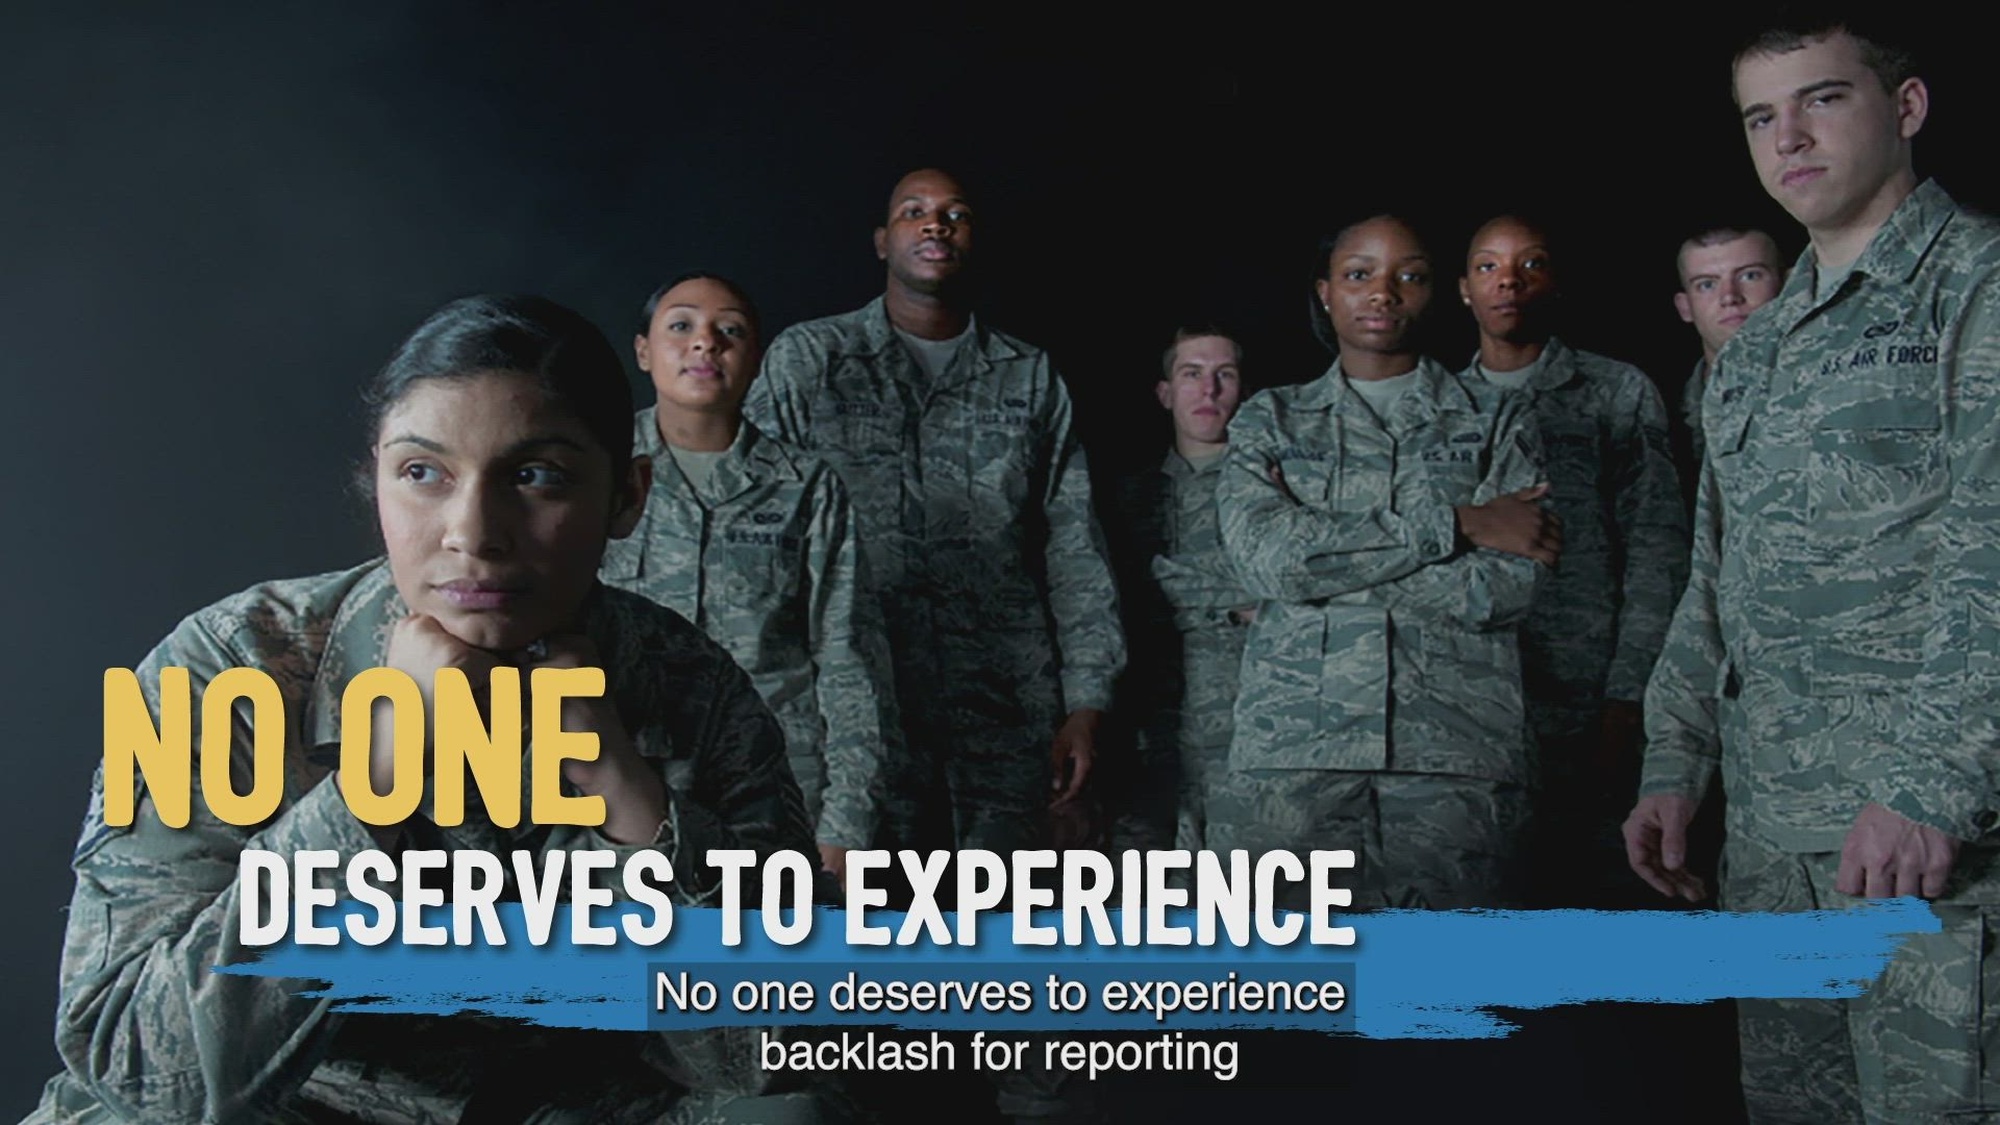 Men account for nearly half of all sexual assault victims in our military prevalence surveys. However, the Department estimates that only 17 percent of male victims report their sexual assault, compared with 38 percent of female victims.

The DoD Sexual Assault Prevention Response Office (SAPRO) is launching an outreach campaign with a series of videos and print materials focused on the experience of men. The "Men's Sexual Assault Prevention and Response (SAPR)
Campaign" will address the toll that sexual assault takes on the individual, the unit, and the force, and also provide information about the kinds of help and support available. While this campaign is focused on men, many elements of the campaign are relevant to all Service members affected by sexual assault.

The campaign acknowledges Courage can take many forms. Coping and surviving with the aftermath of sexual assault takes Courage. The willingness to acknowledge the benefits of seeking available help and resources reflects Courage. There is Courage in moving through the healing process and finding your unique path to recovery. Courage is evident when a friend or loved one steps forward and offers to help. There is Courage in maintaining a command climate that prevents, responds to, and supports Service members who are affected by sexual assault or at higher risk of sexual violence. Courage helps us start over despite doubts and worries. We honor all these forms of Courage.

Powerful acts of Courage can fuel change.

For confidential 24/7 crisis intervention, call or visit the DoD Safe Helpline at 877-995-5247 or www.safehelpline.org